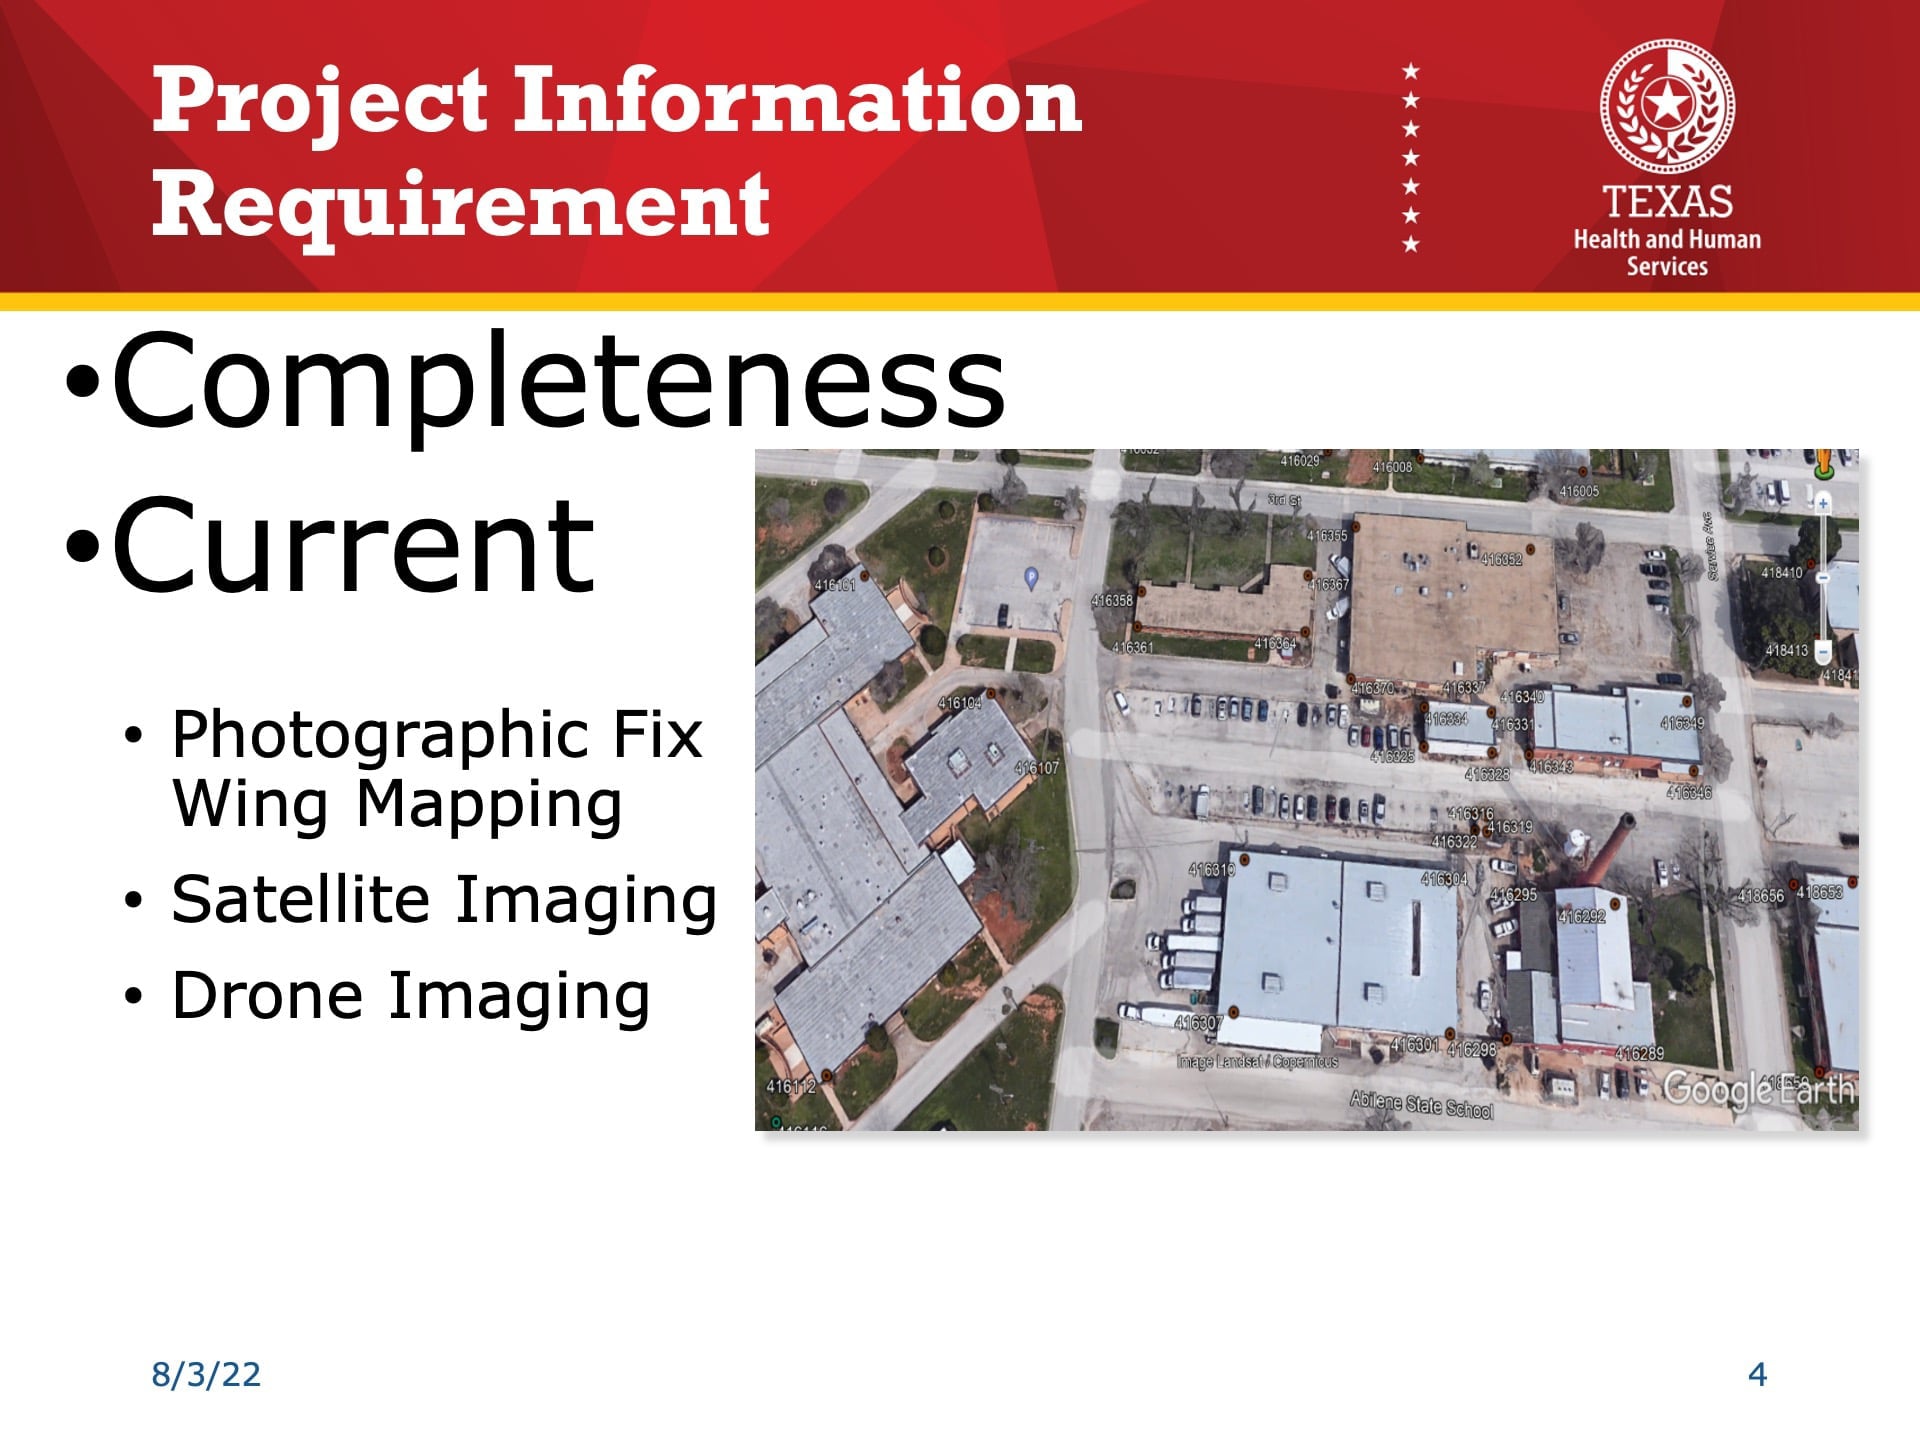 Esri UC 2022 Slide Reading: "Project Information Requirement: Completeness, Current. Bullet points includeL Photographic Fix Wing Mapping, Sateliite Imaging, Drone Imaging." A satellite image is shown to the right.